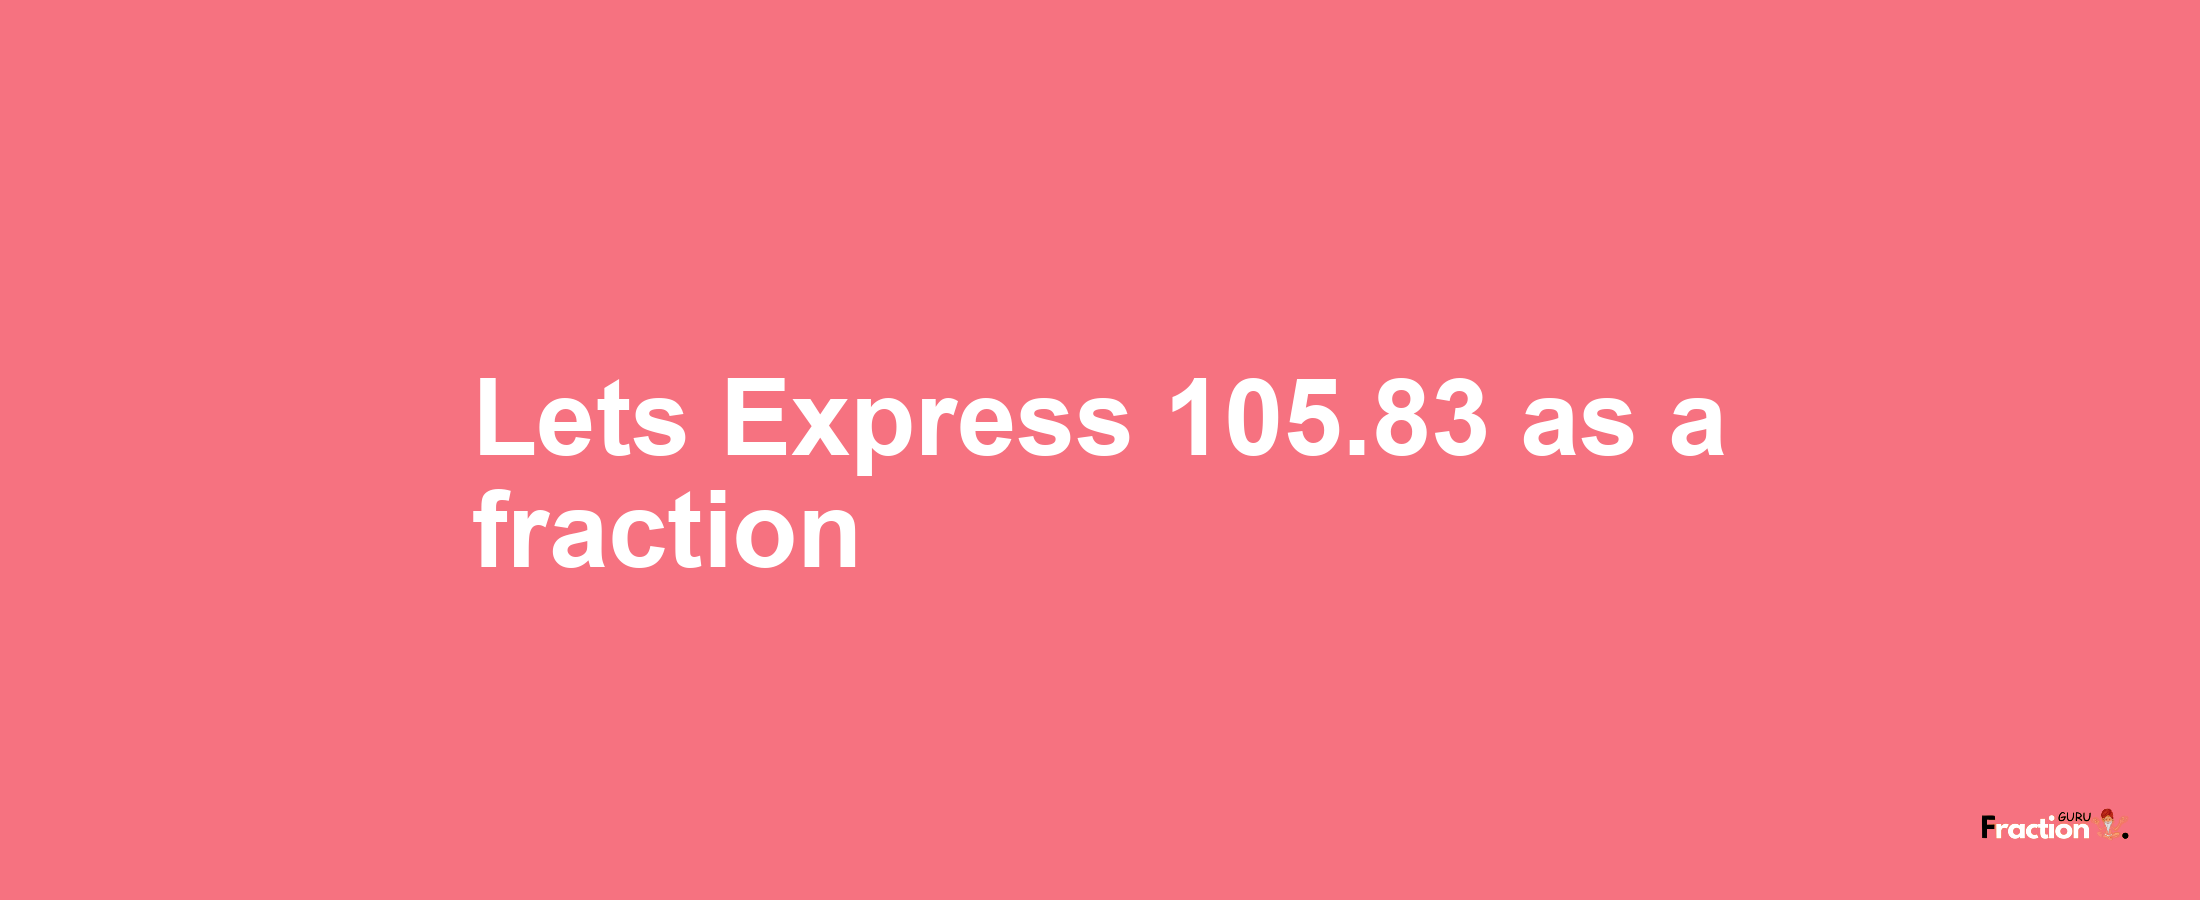 Lets Express 105.83 as afraction